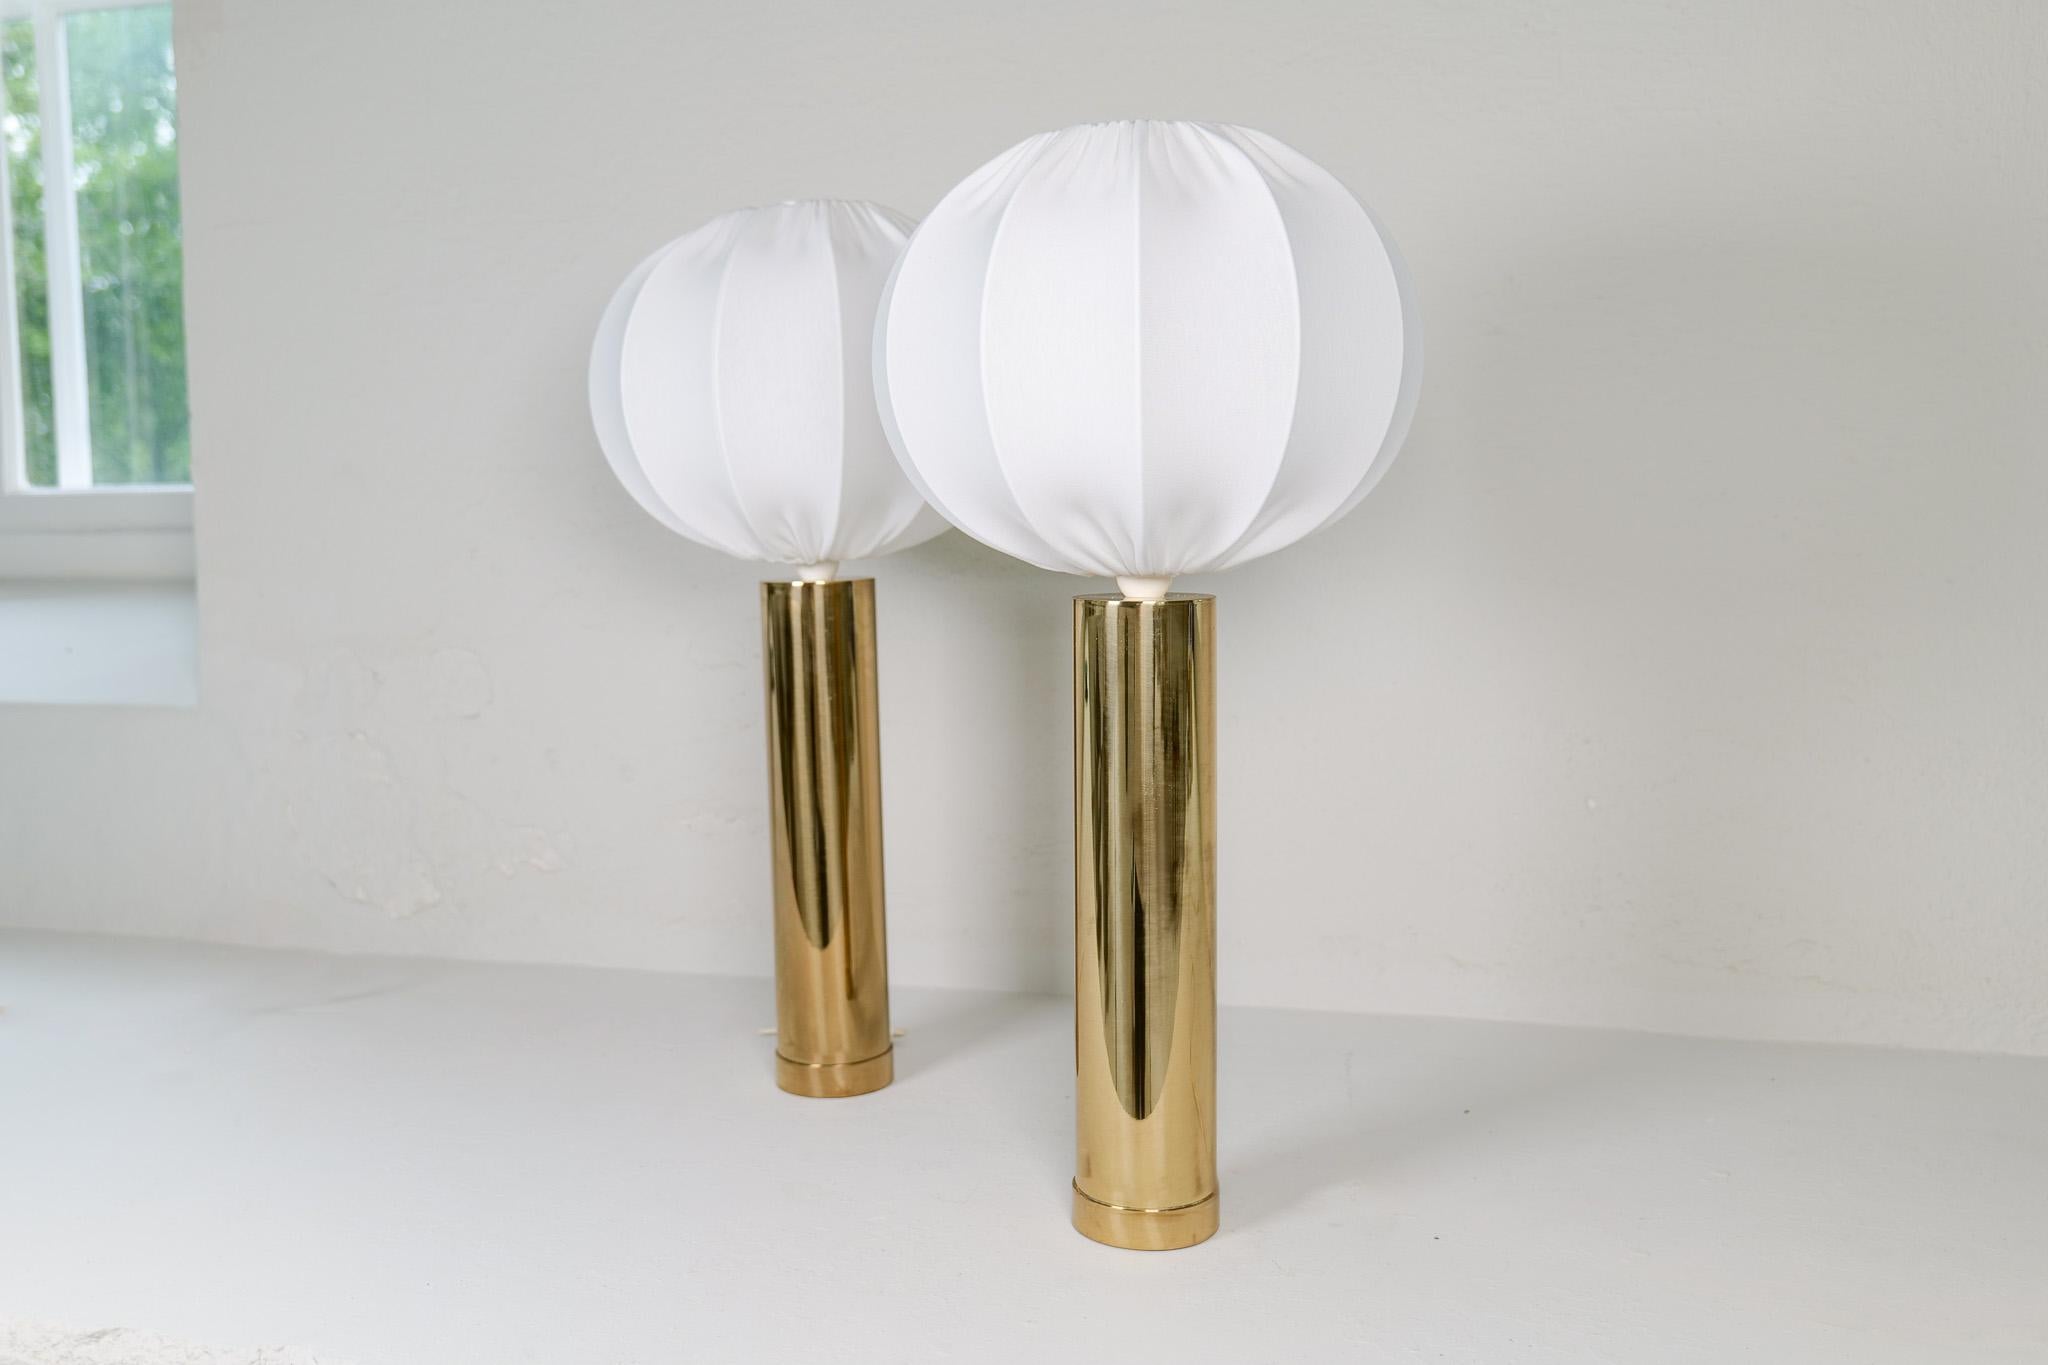 Swedish Midcentury Pair of Large Brass Bergboms B-010 Table Lamps, 1960s, Sweden For Sale